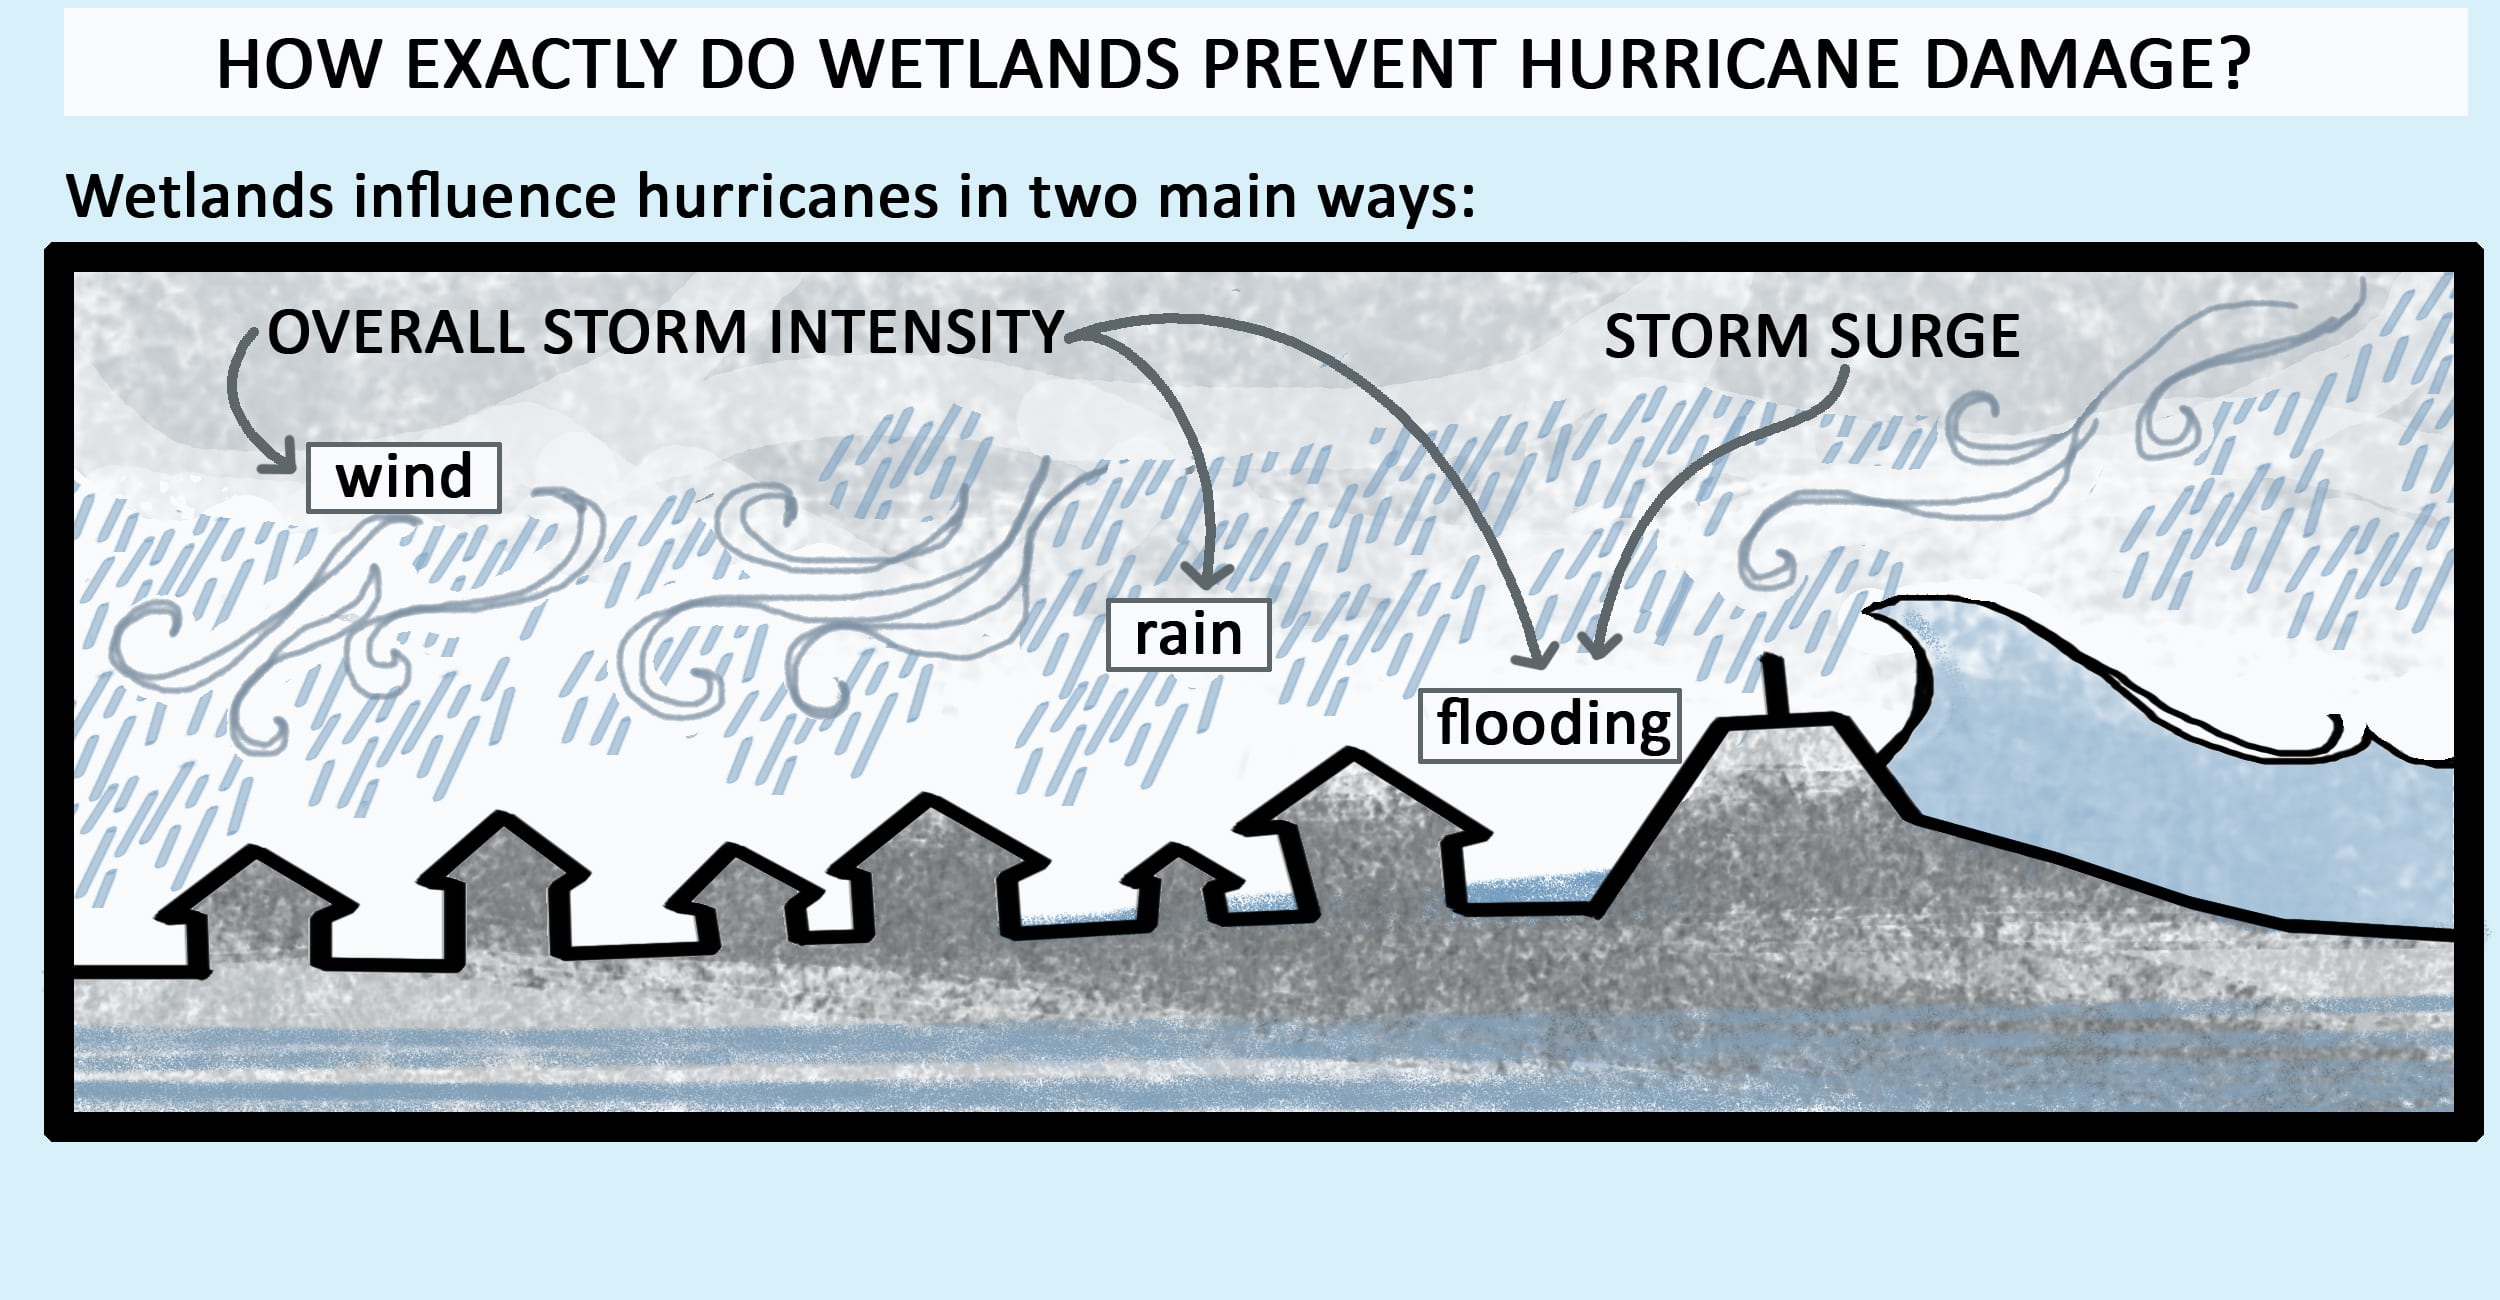 Wetlands ameliorate storm intensity and storm surge